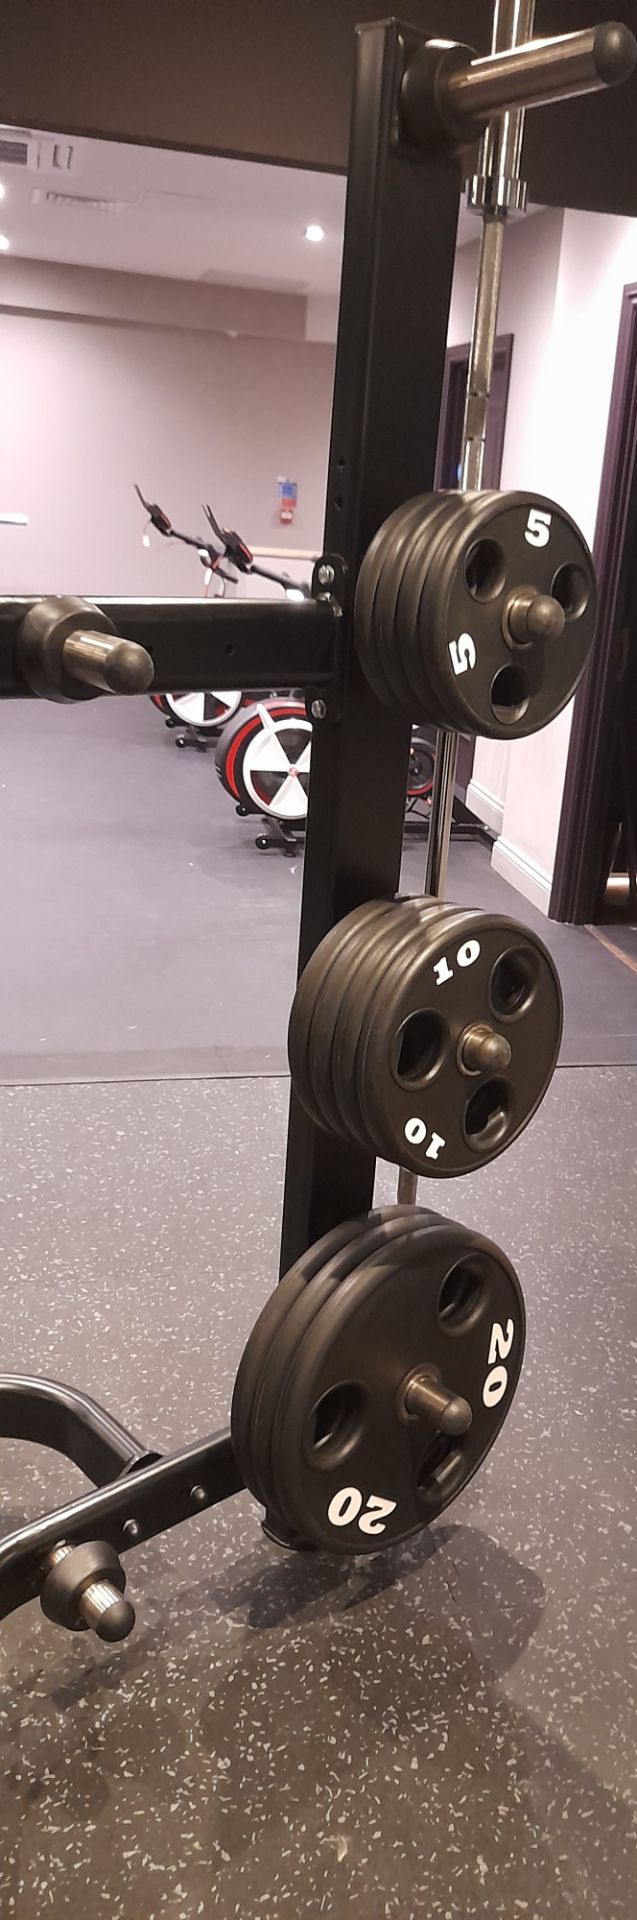 Indigo Fitness 530 power rack UB08C Serial number 28402/10 with quantity of barbell weights to racks - Bild 4 aus 4